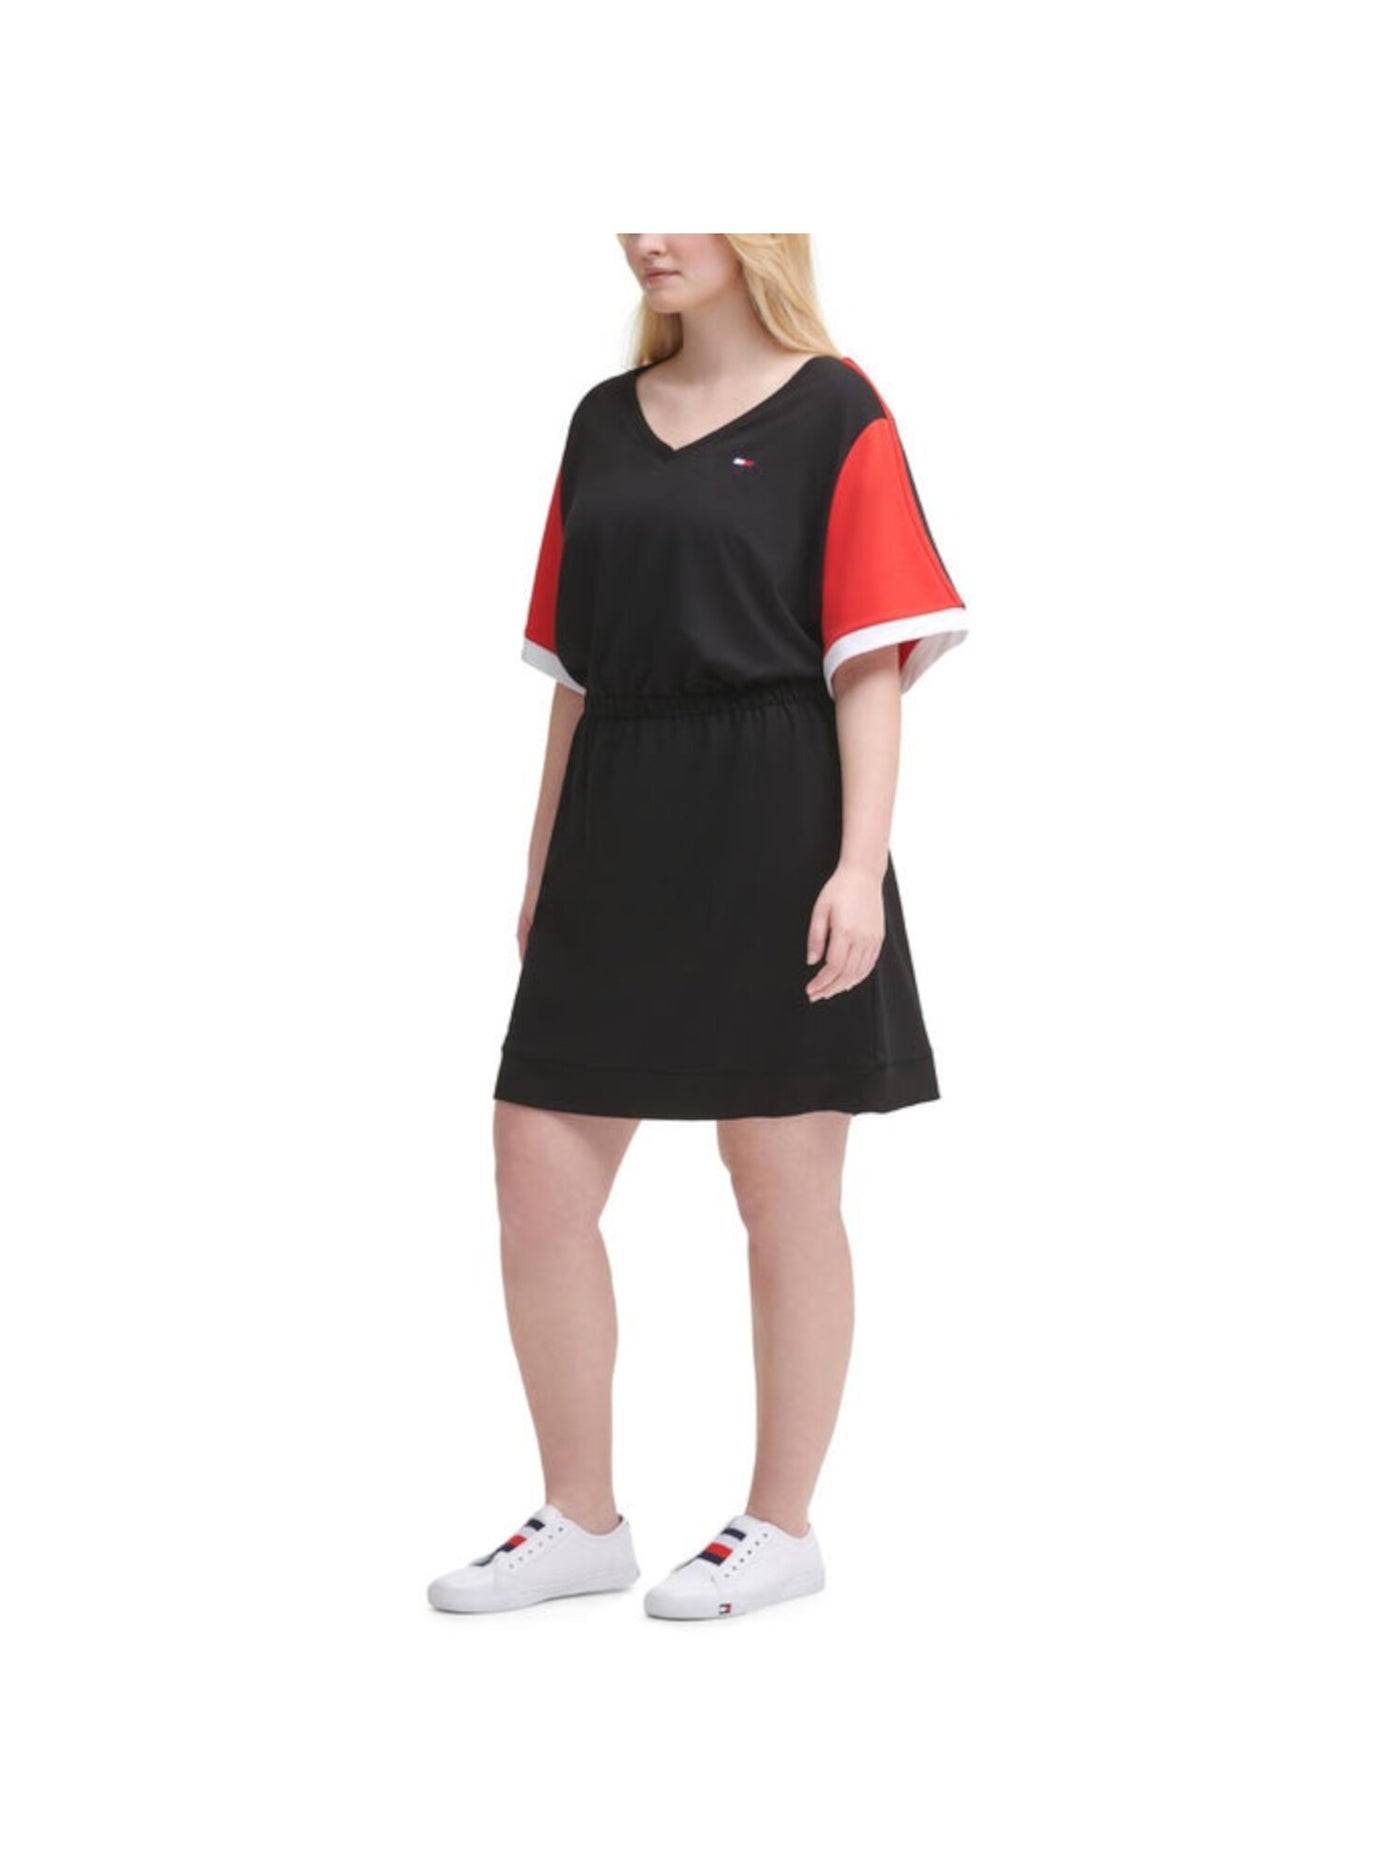 TOMMY HILFIGER SPORT Womens Black Stretch Ribbed Elastic Waist Color Block Elbow Sleeve V Neck Above The Knee Shirt Dress Plus 0X